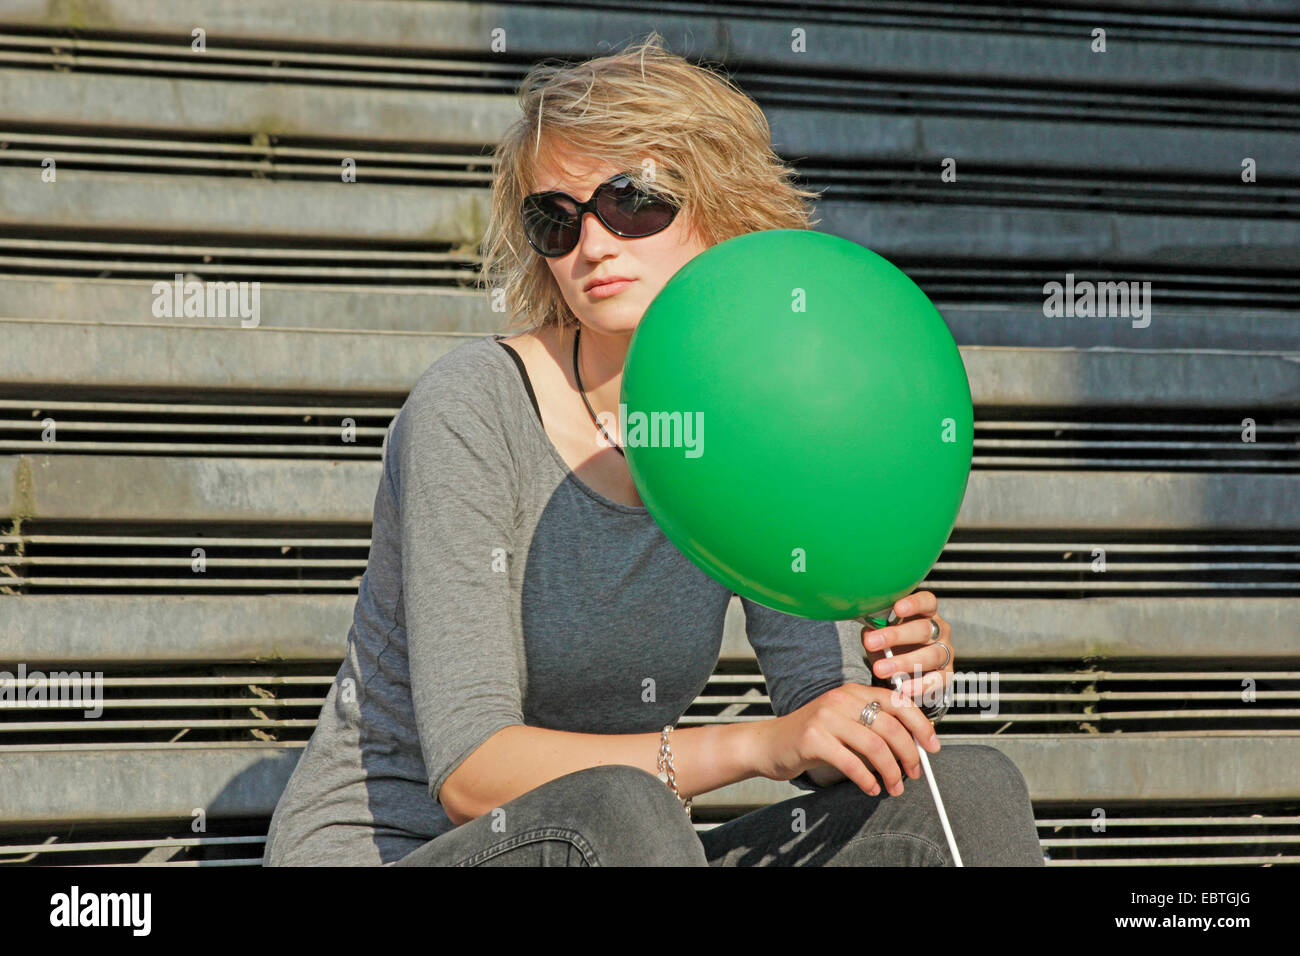 young blond woman with sunglasses and green balloon sitting on stairs, Germany Stock Photo